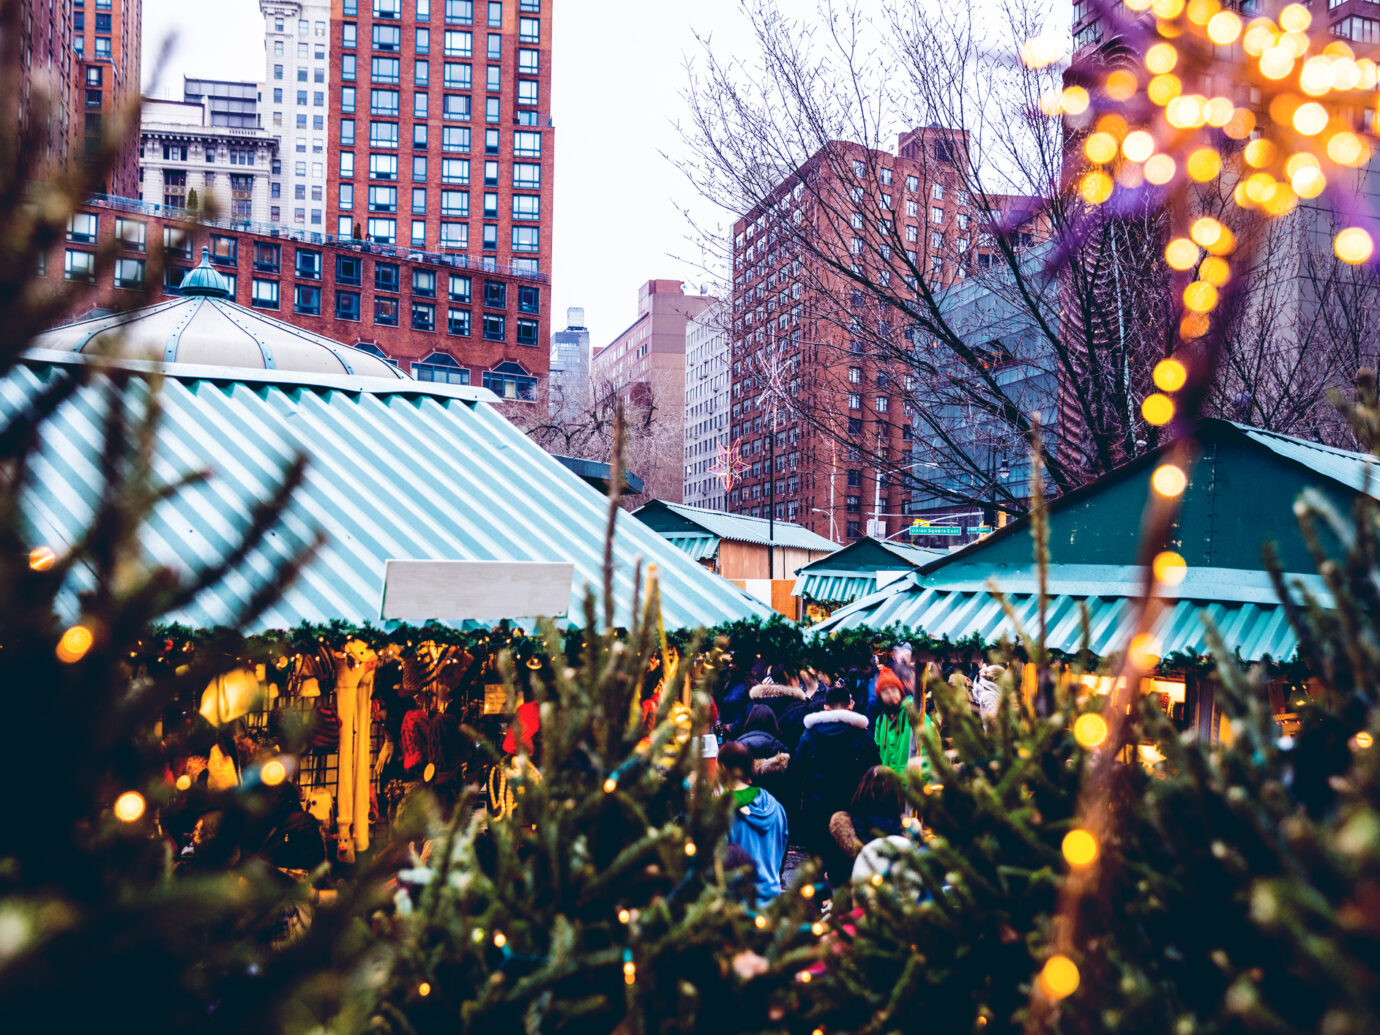 People visiting Christmas Market stands in Union Square in Midtown Manhattan.